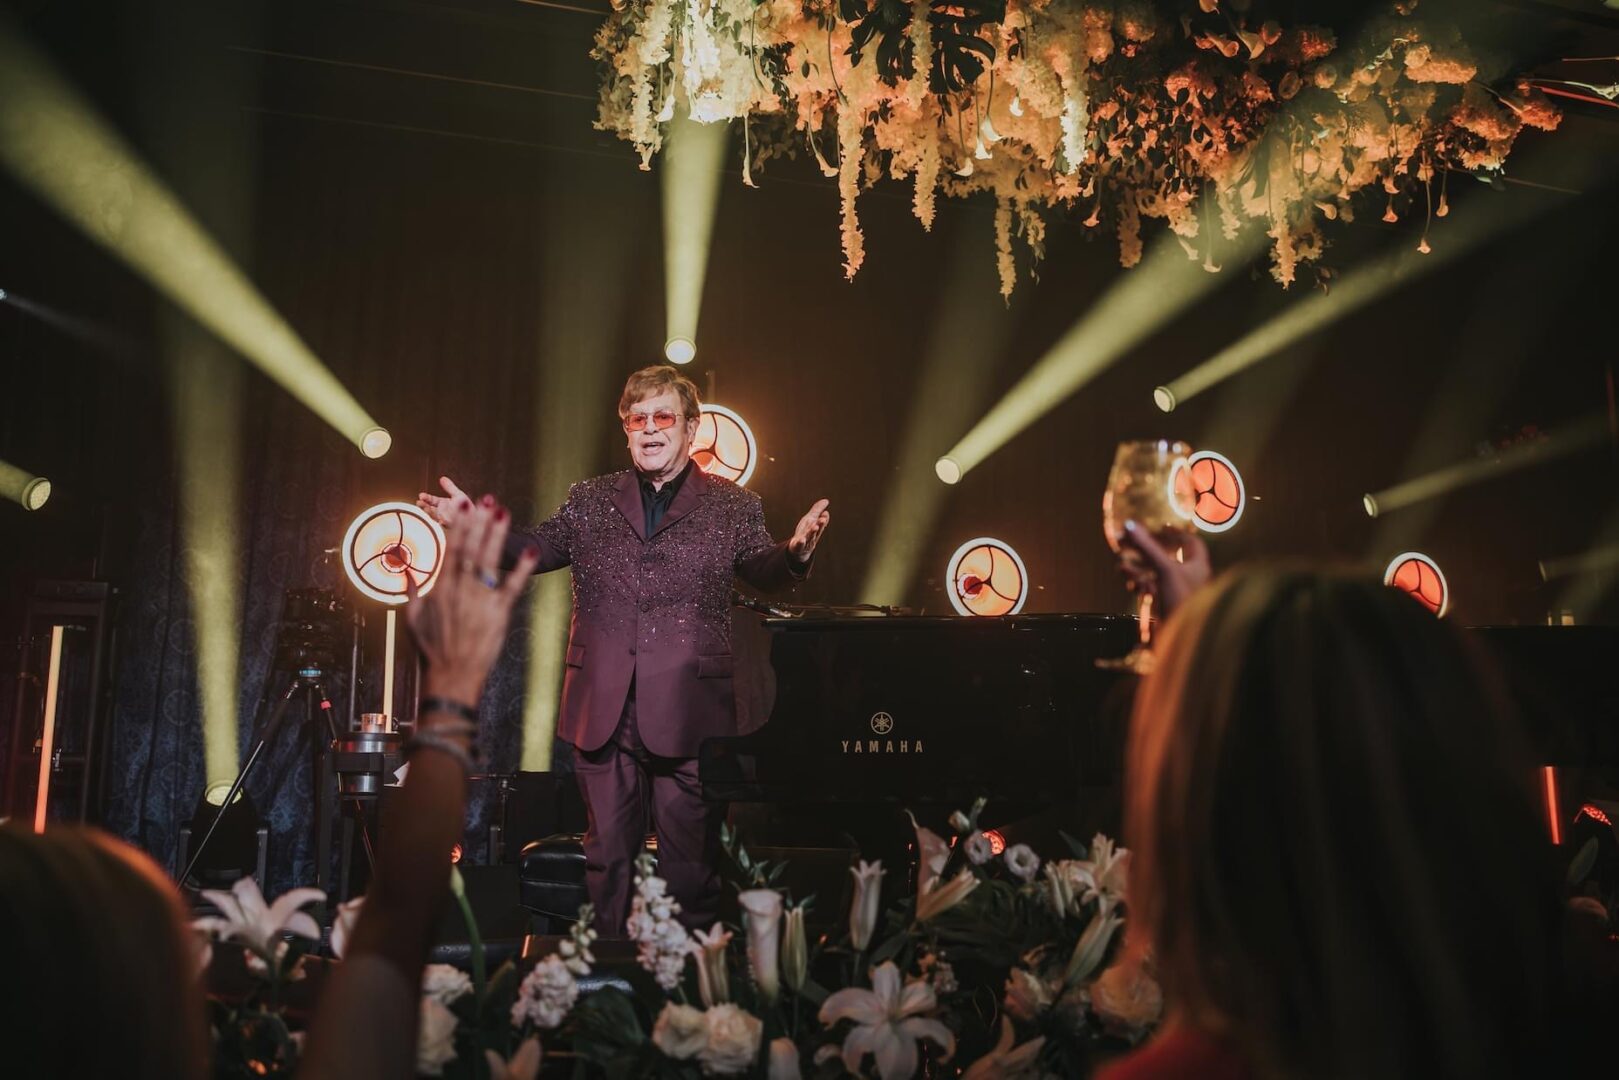 Elton John Performs on Stage at Concert.